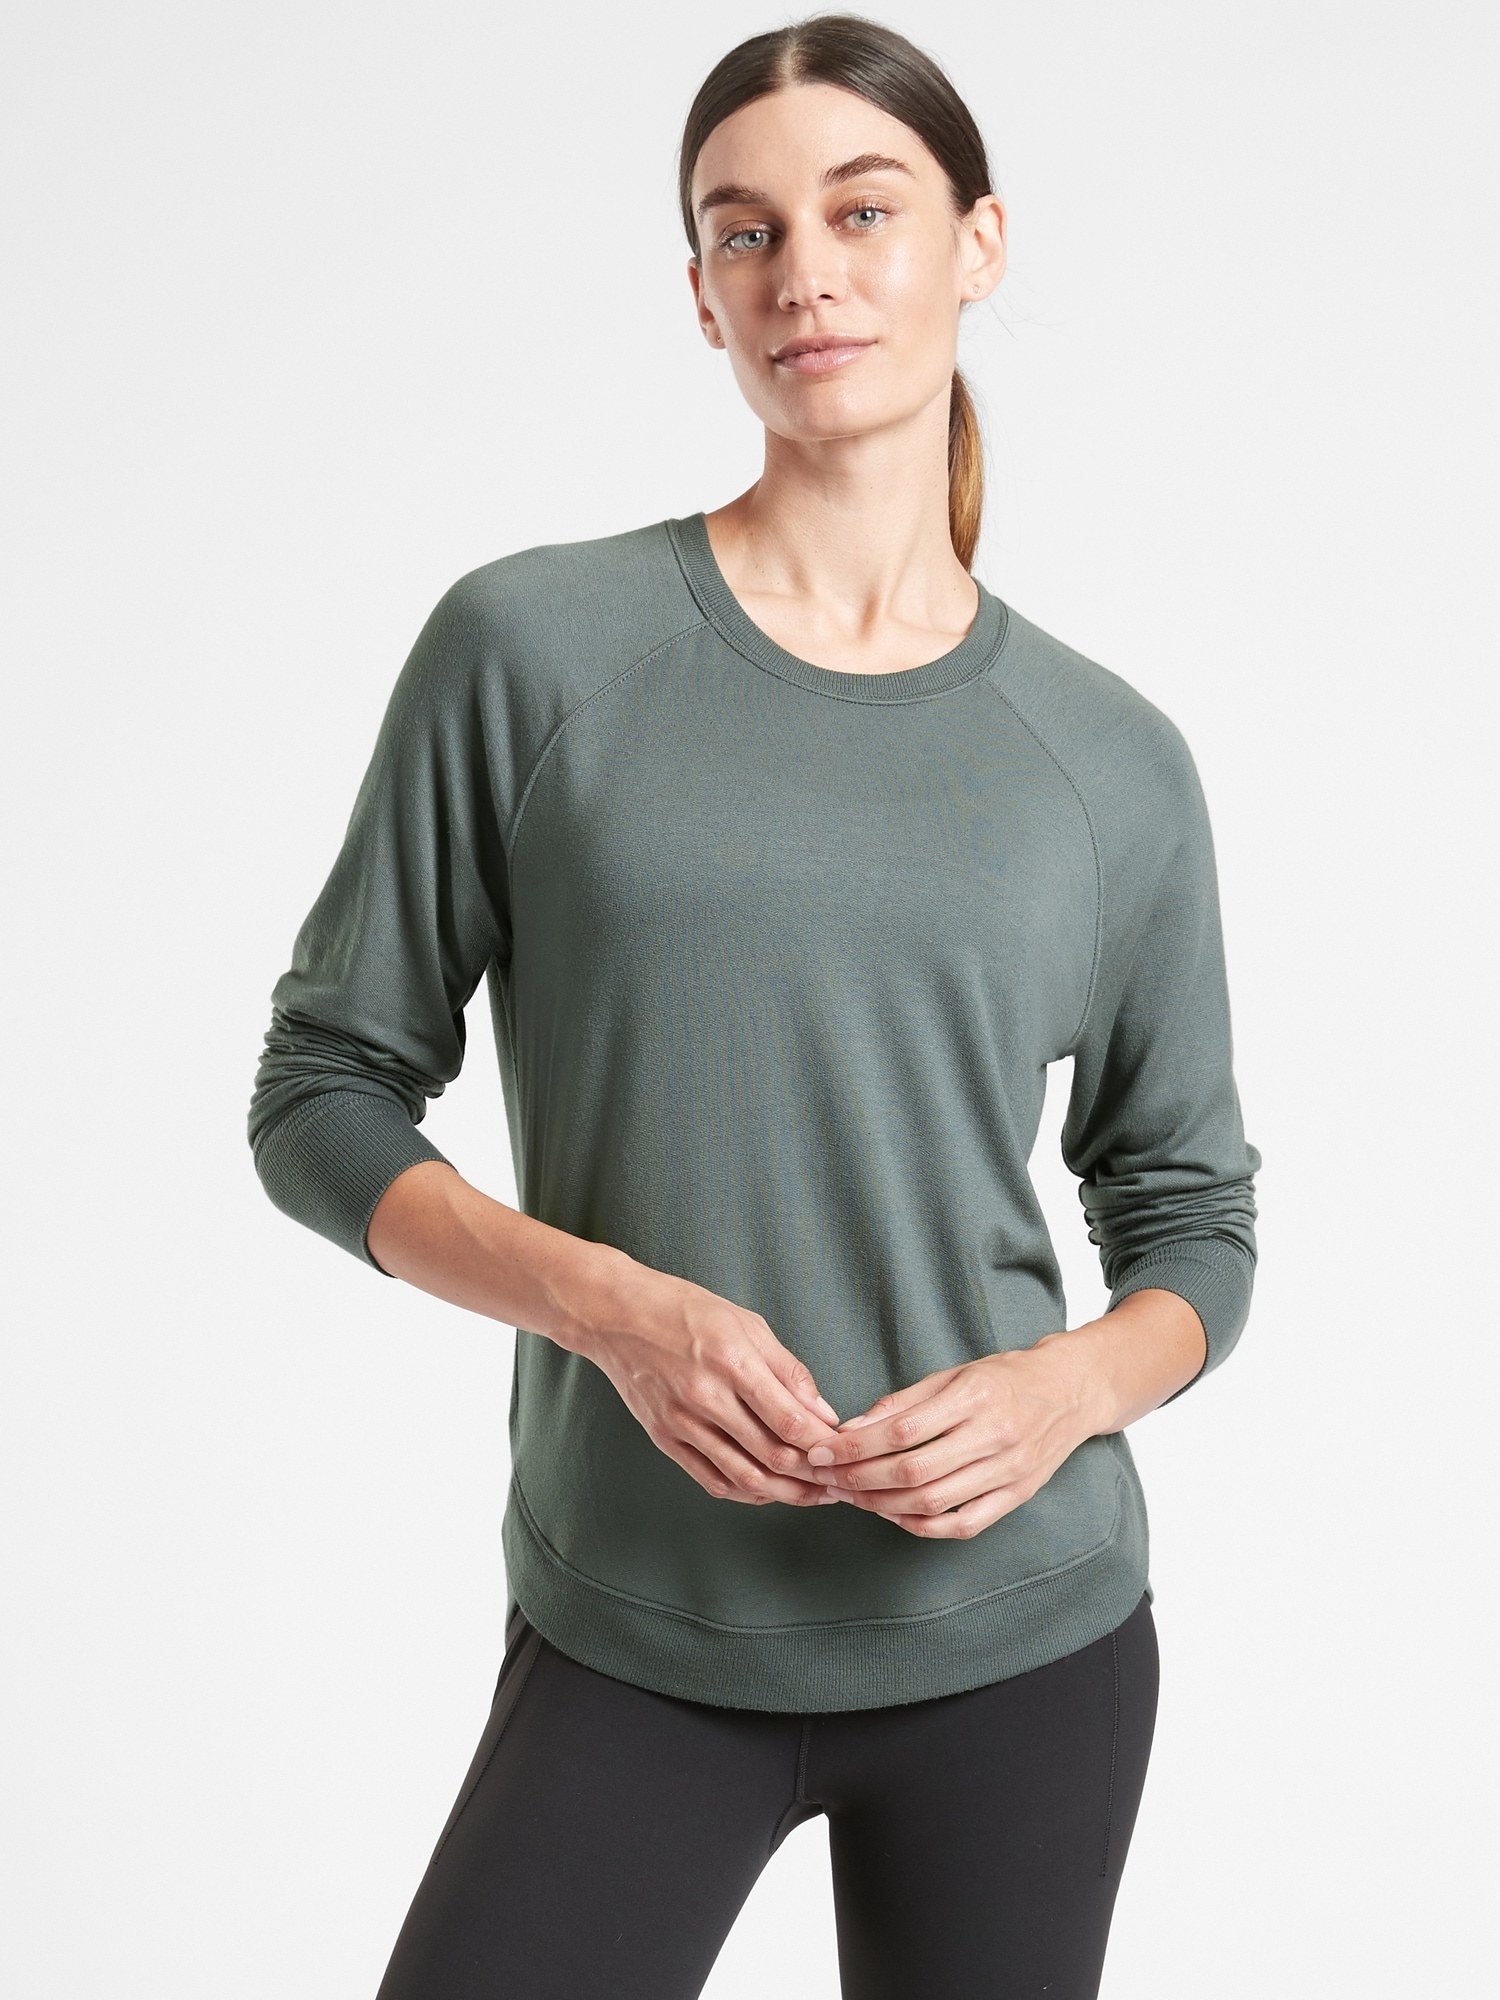 21 Fabulous Finds To Cop During Athleta's 20% Off Cyber Monday Sale